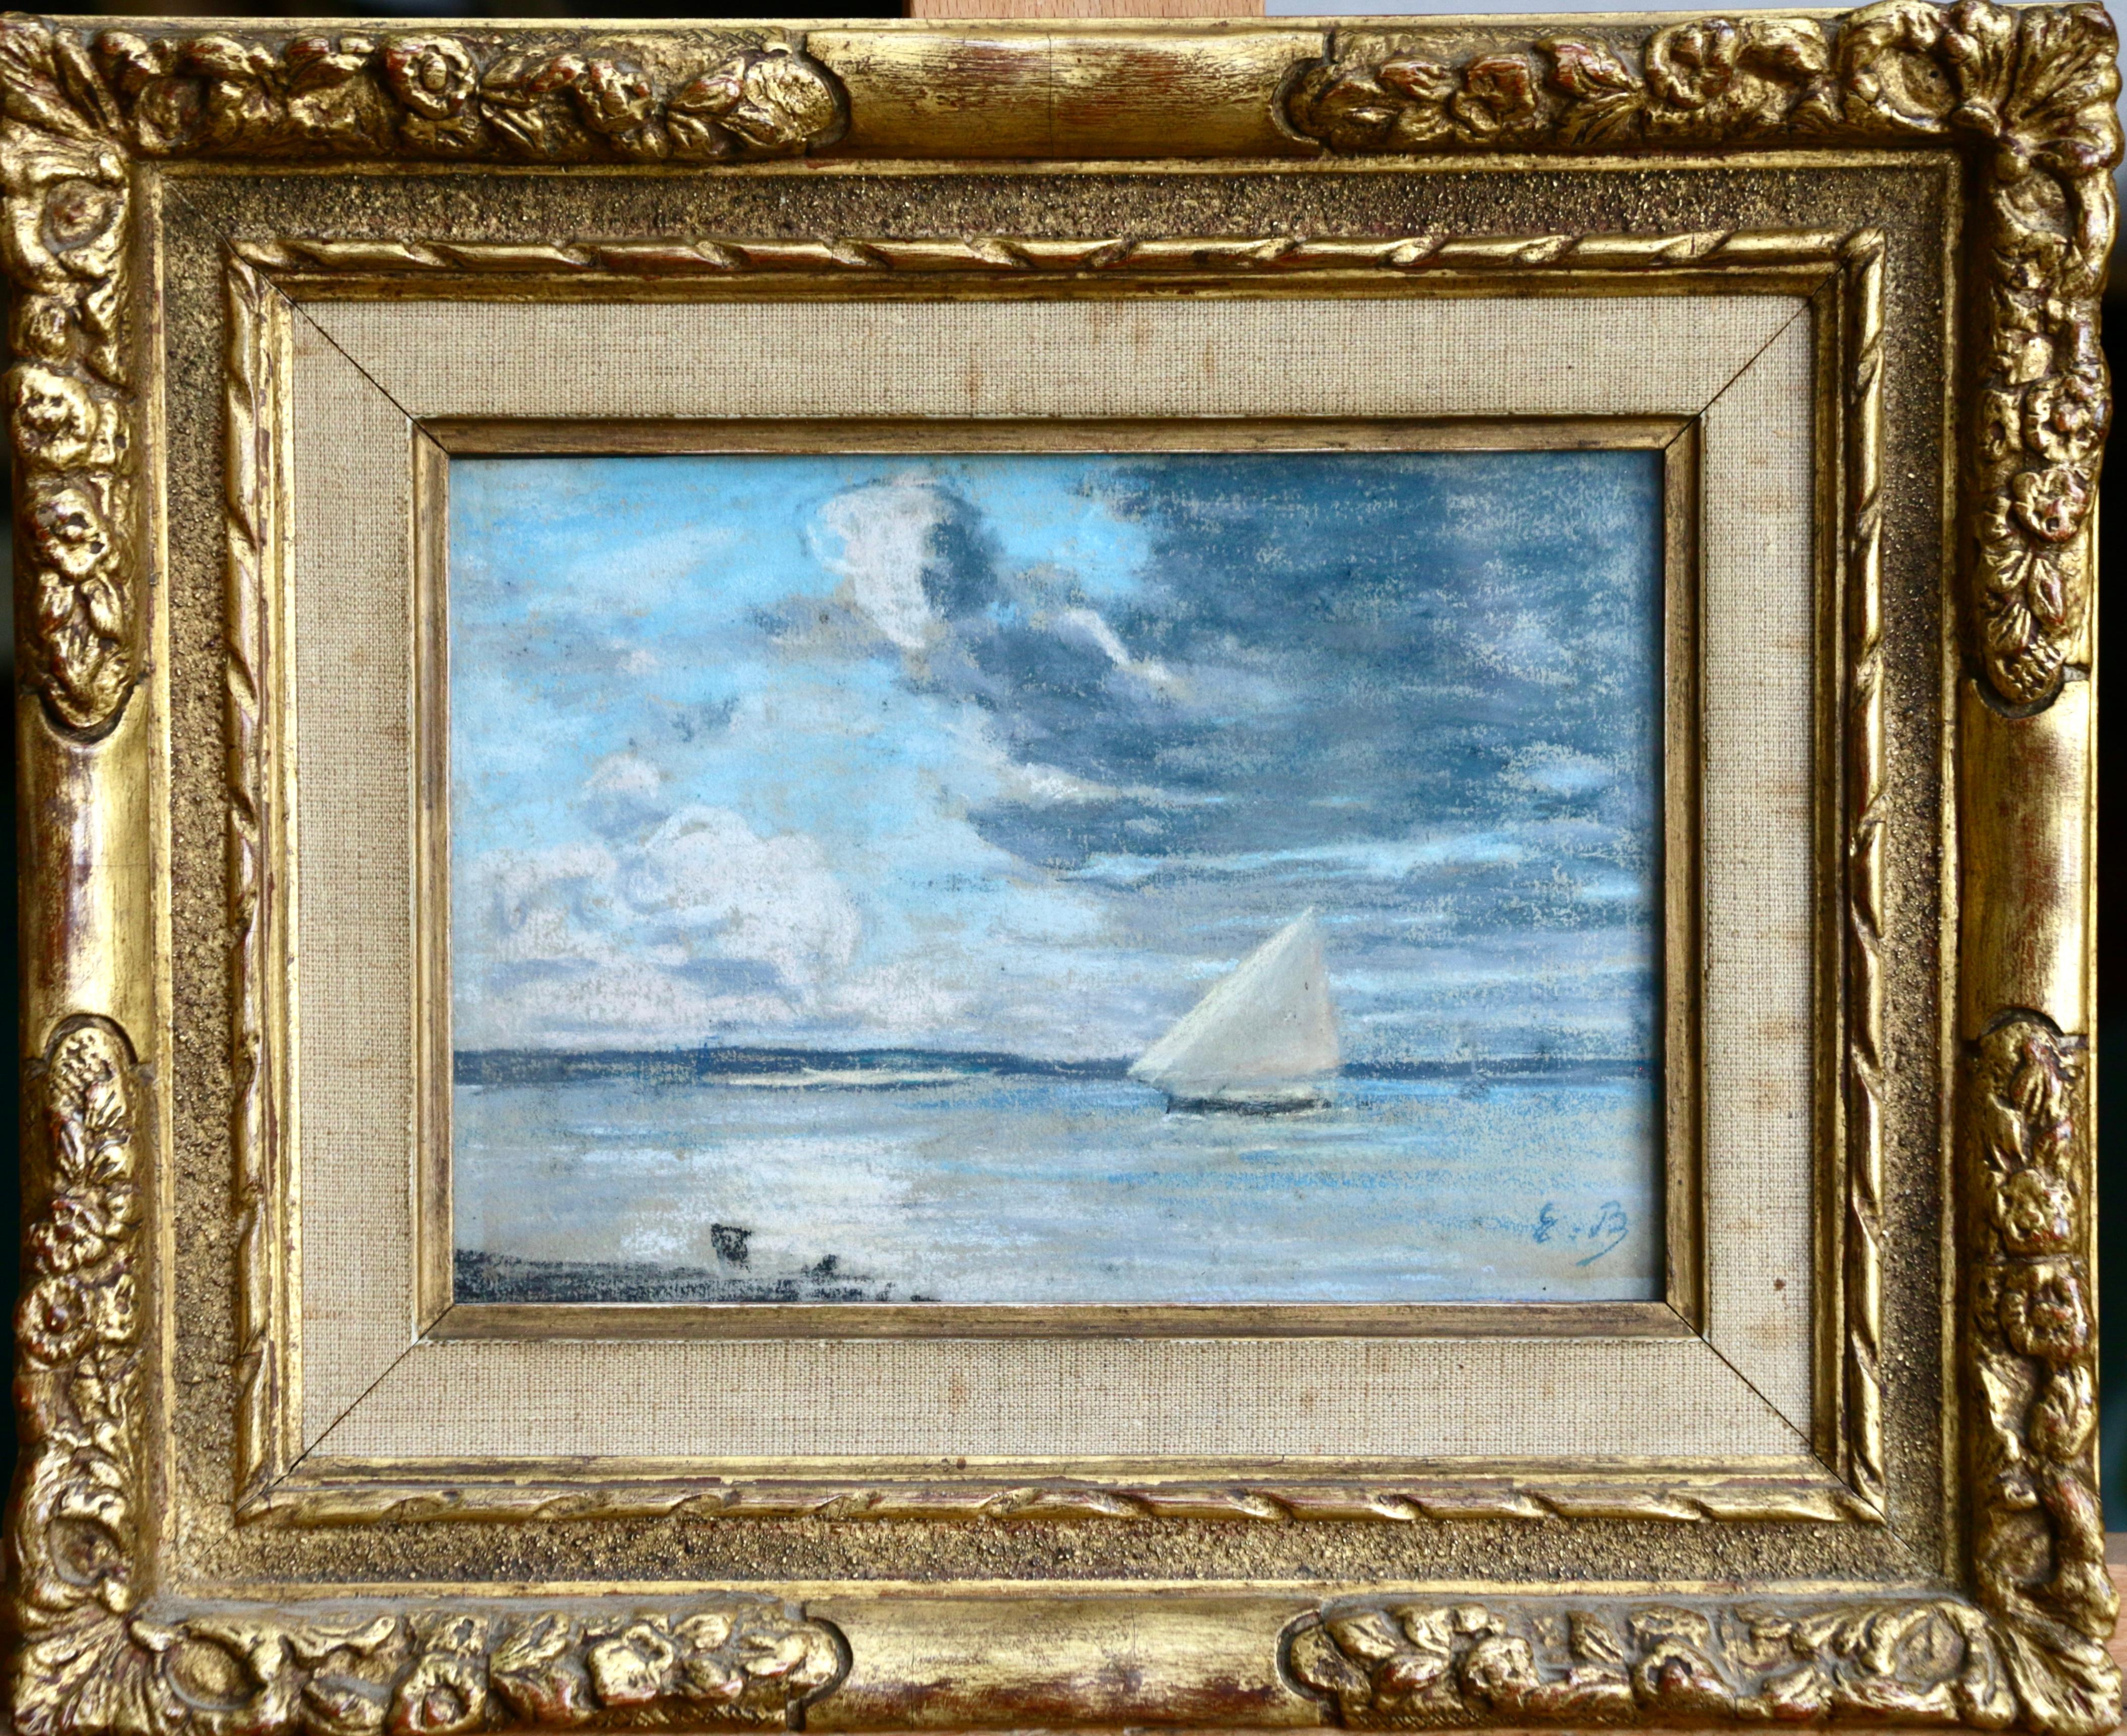 Boat off the Coast - 19th Century Marine Pastel, Boat at Sea by Eugene Boudin - Painting by Eugène Louis Boudin